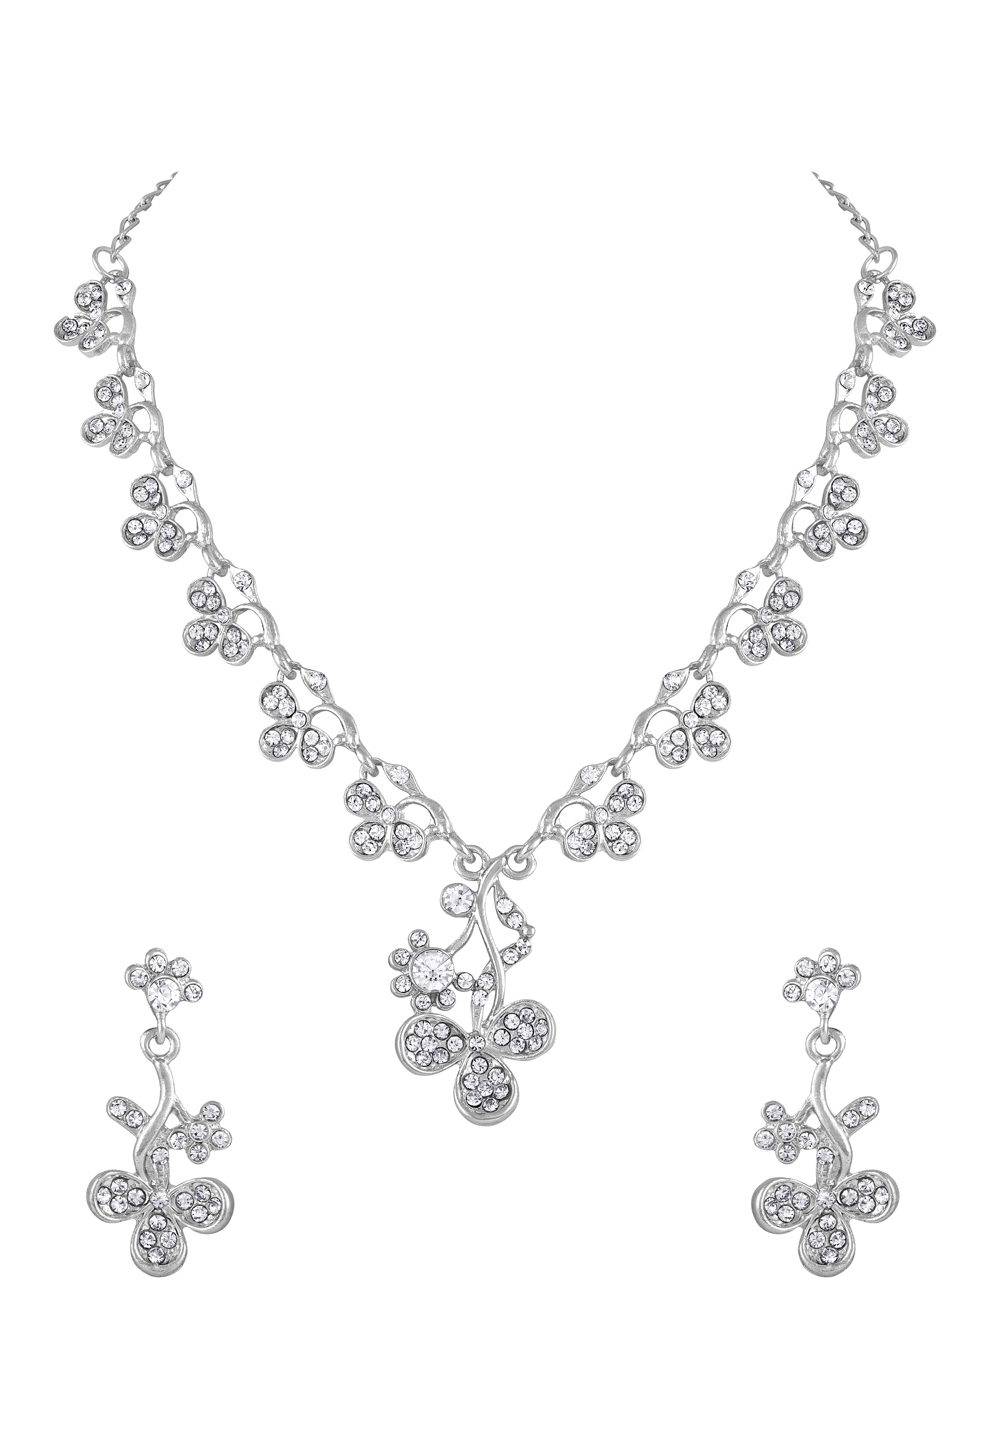 Silver Zinc Necklace Set With Earrings 191920